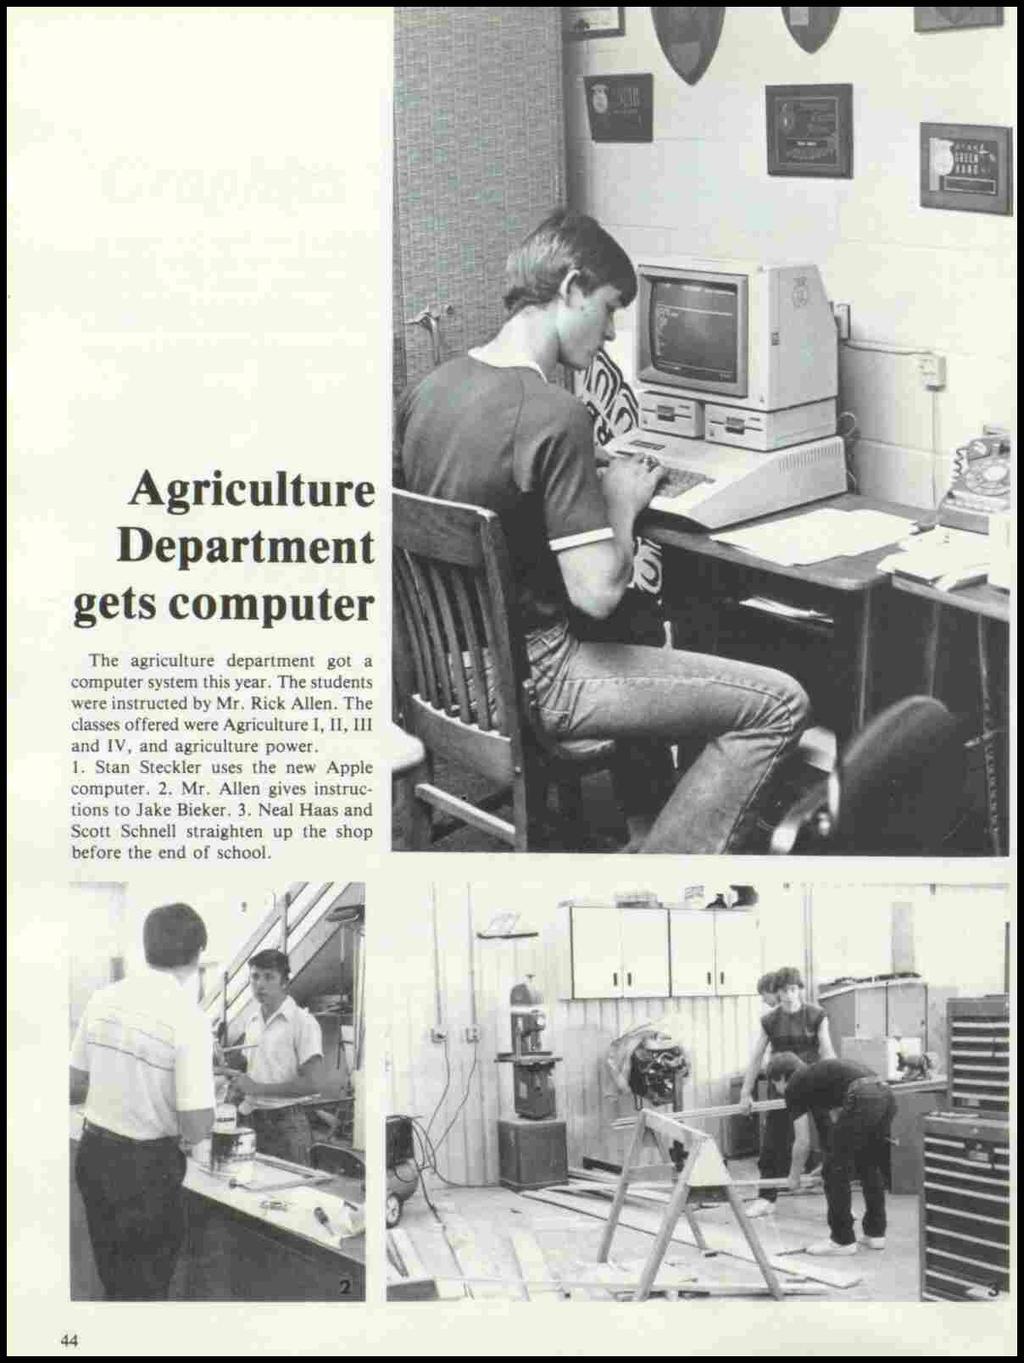 Agriculture Department gets computer The agriculture department got a computer system this year. The students were instructed by Mr. Rick Allen.